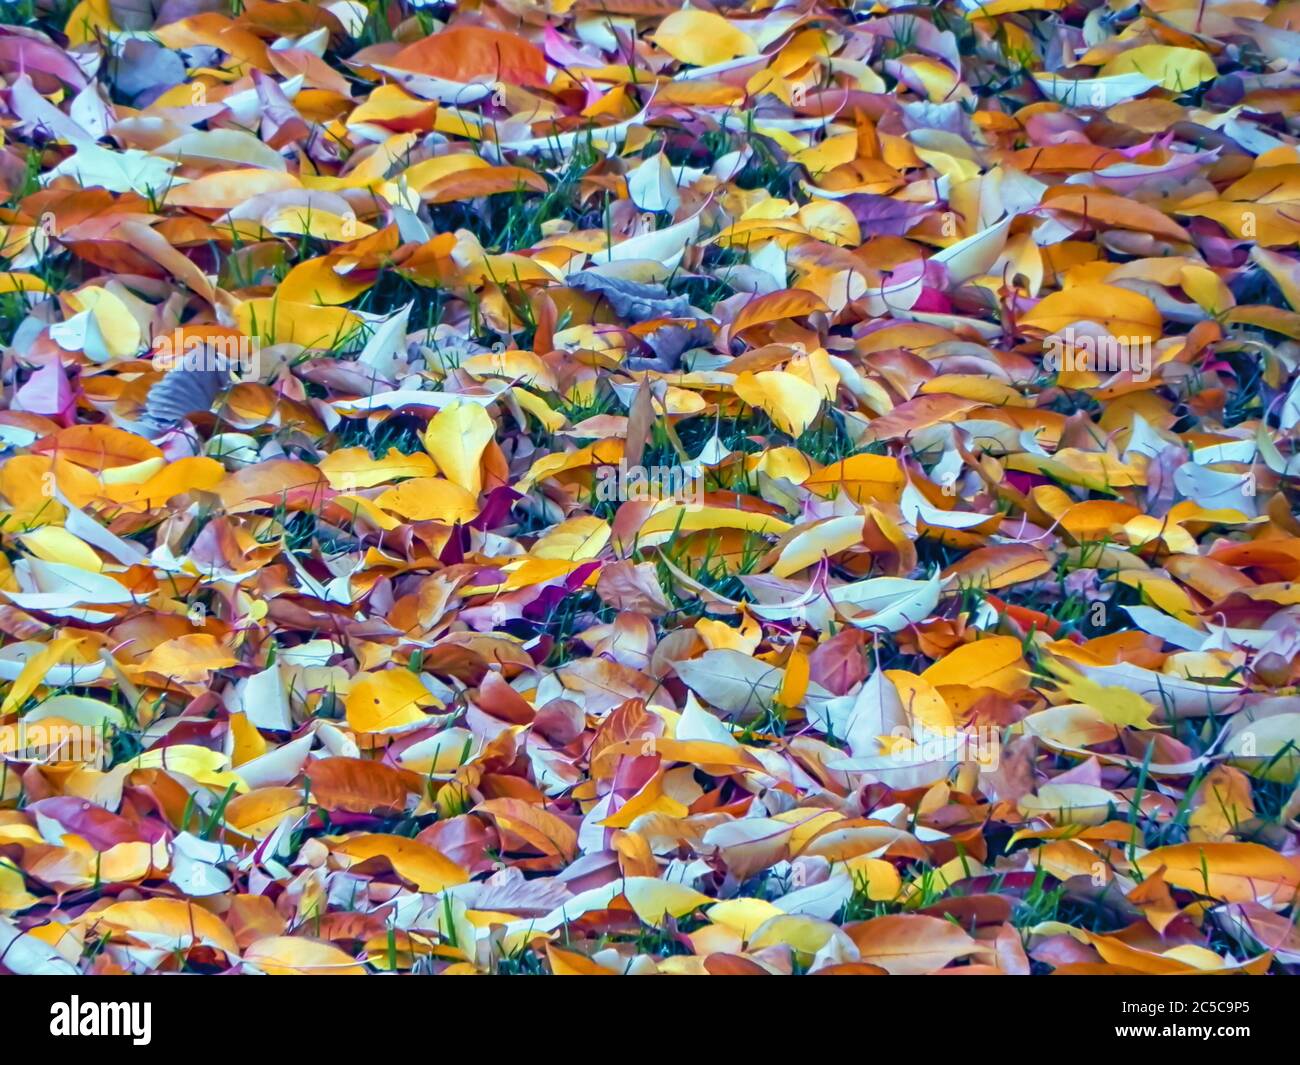 Dried leaves shed by the plants during the fall/autumn season. Maple and cherry leaves are seen in the image. Stock Photo